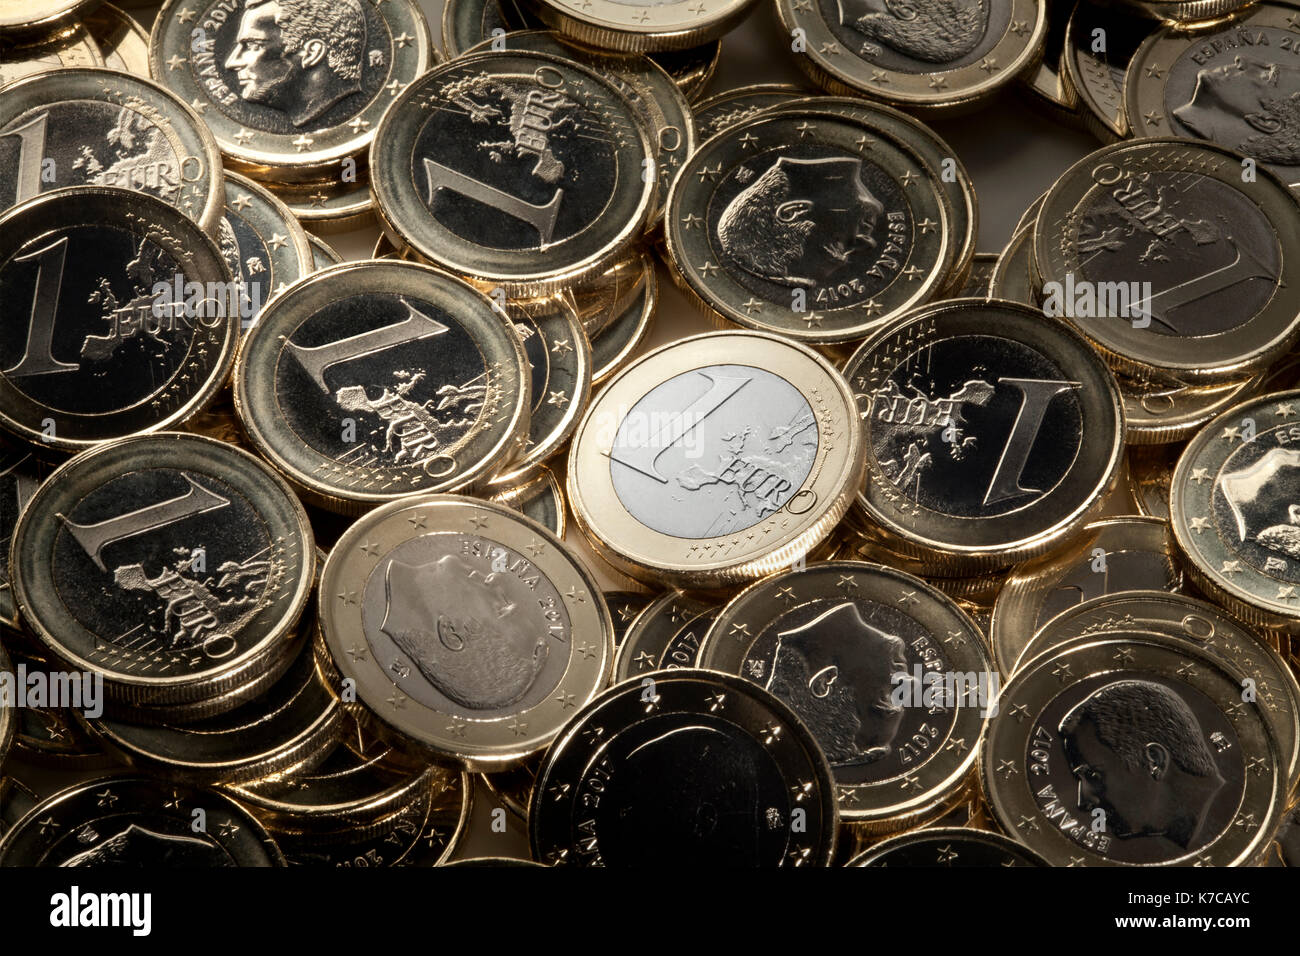 One euro coin prominent from among many euro pieces. Stock Photo